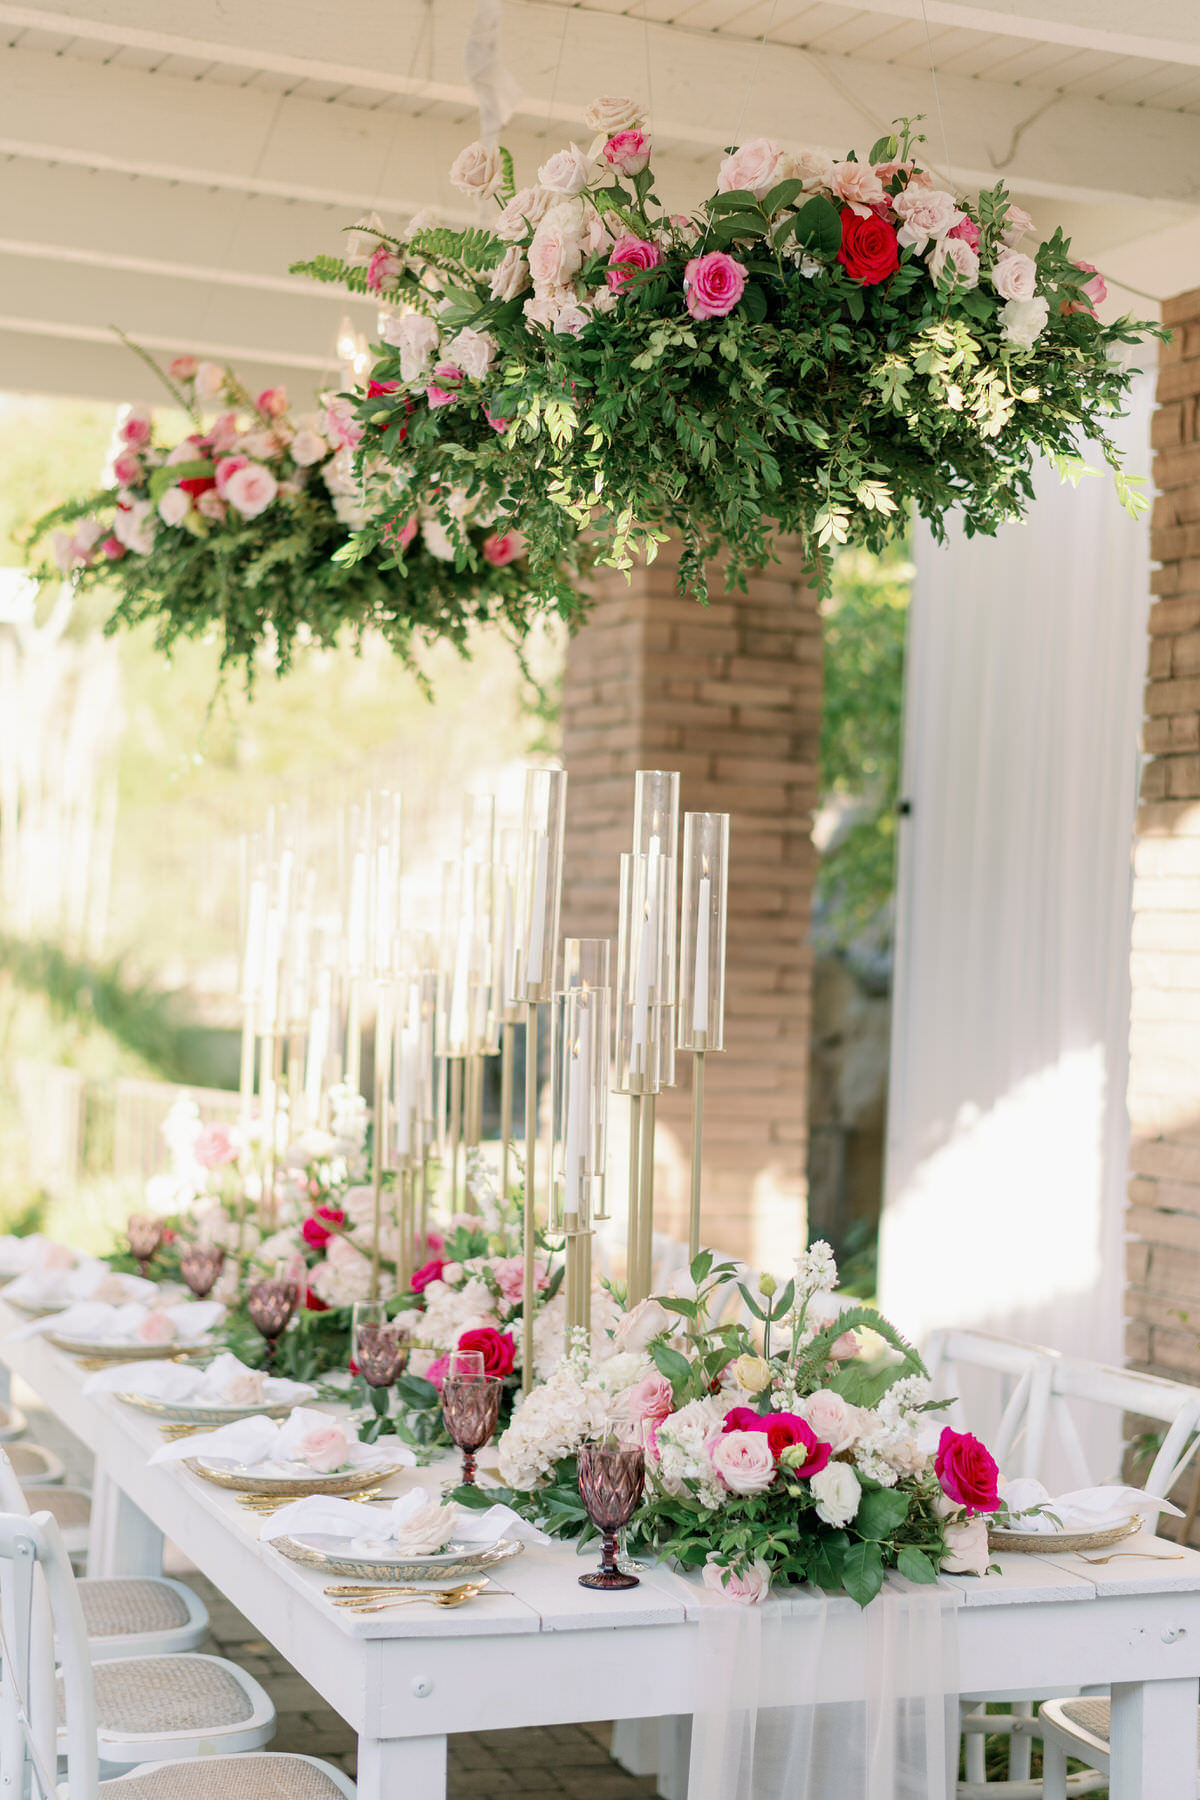 Wedding table greenery and roses installation - Peony Park Photography